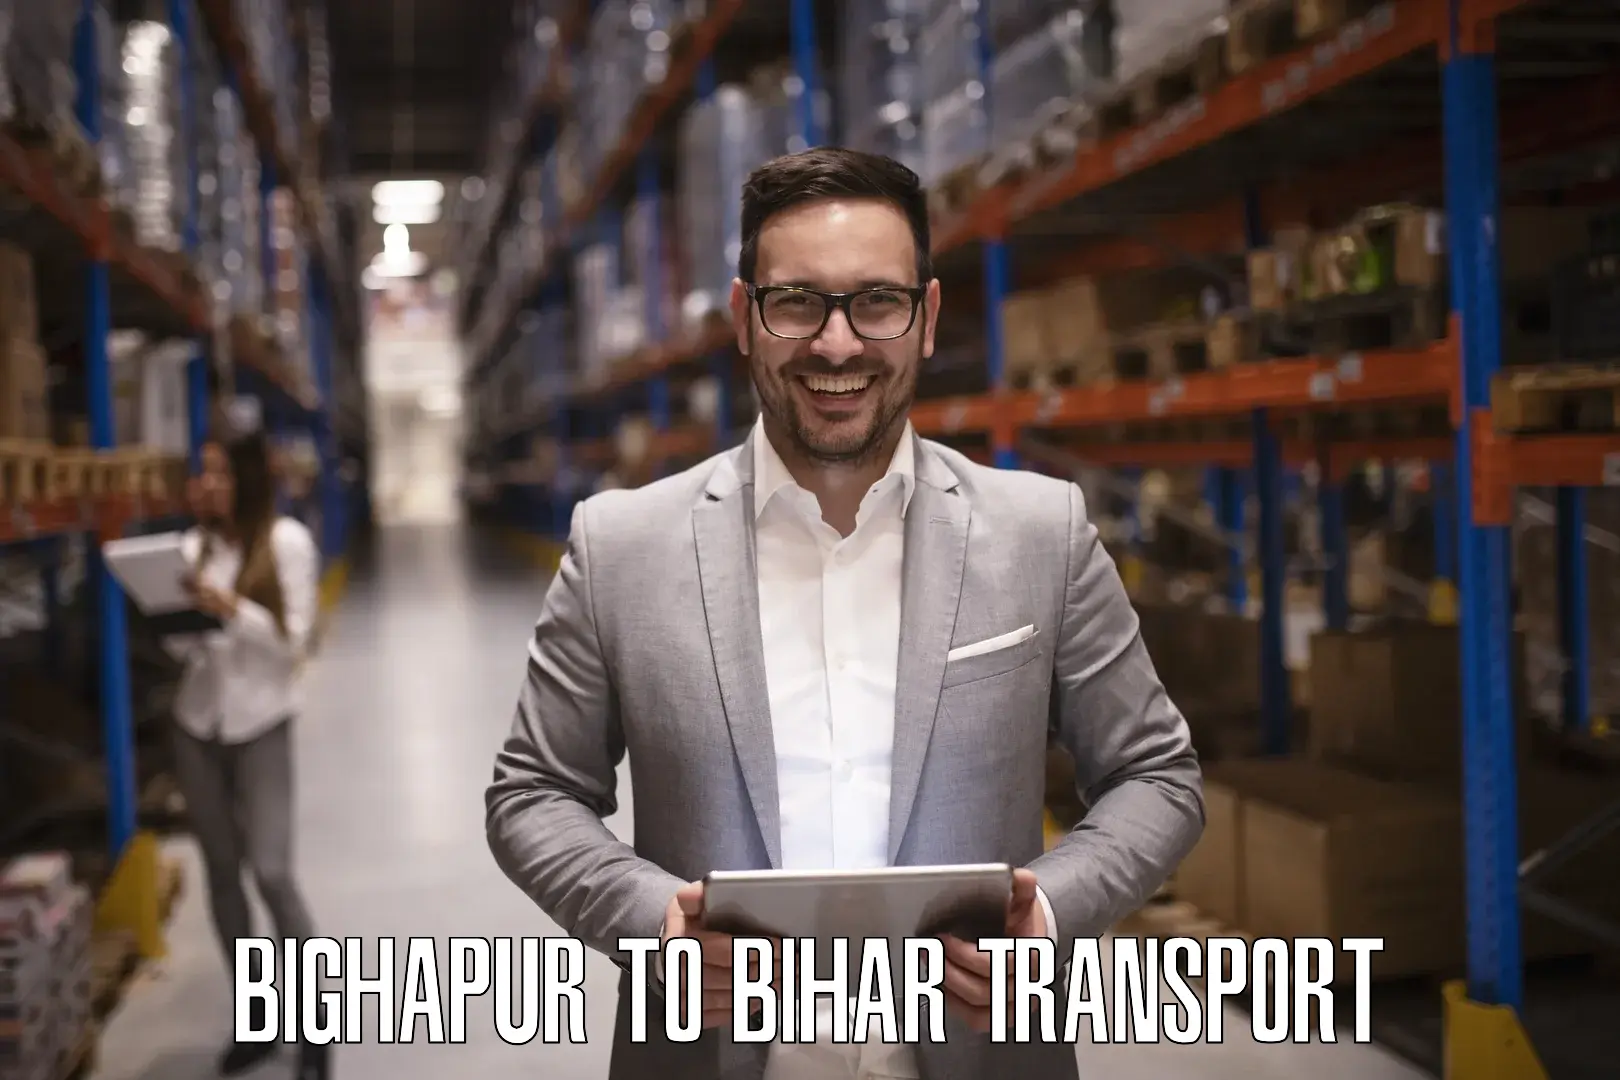 Road transport online services Bighapur to Hajipur